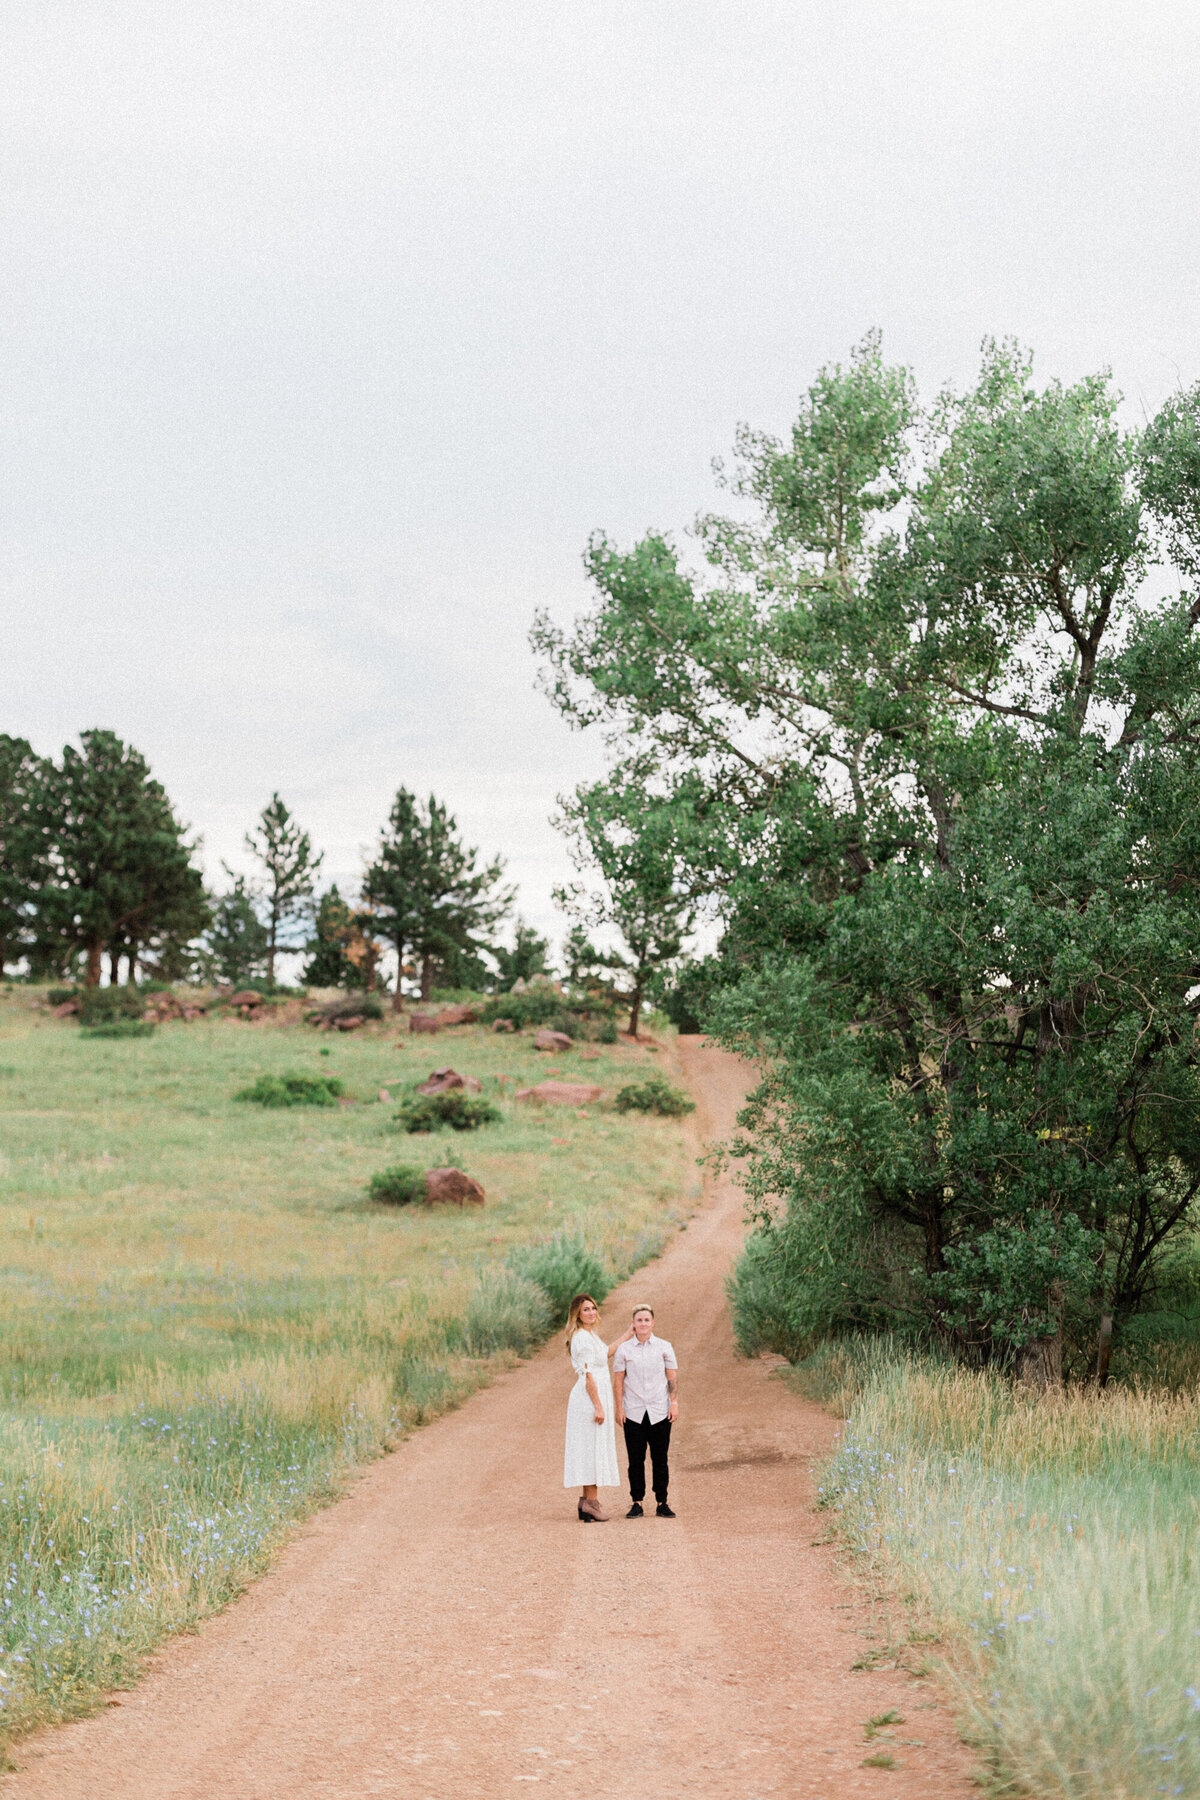 Sunrise_Engagement_Session_Boulder_Coulter_Lgbtq_by_Colorado_Wedding_Photographer_Diana_Coulter-28